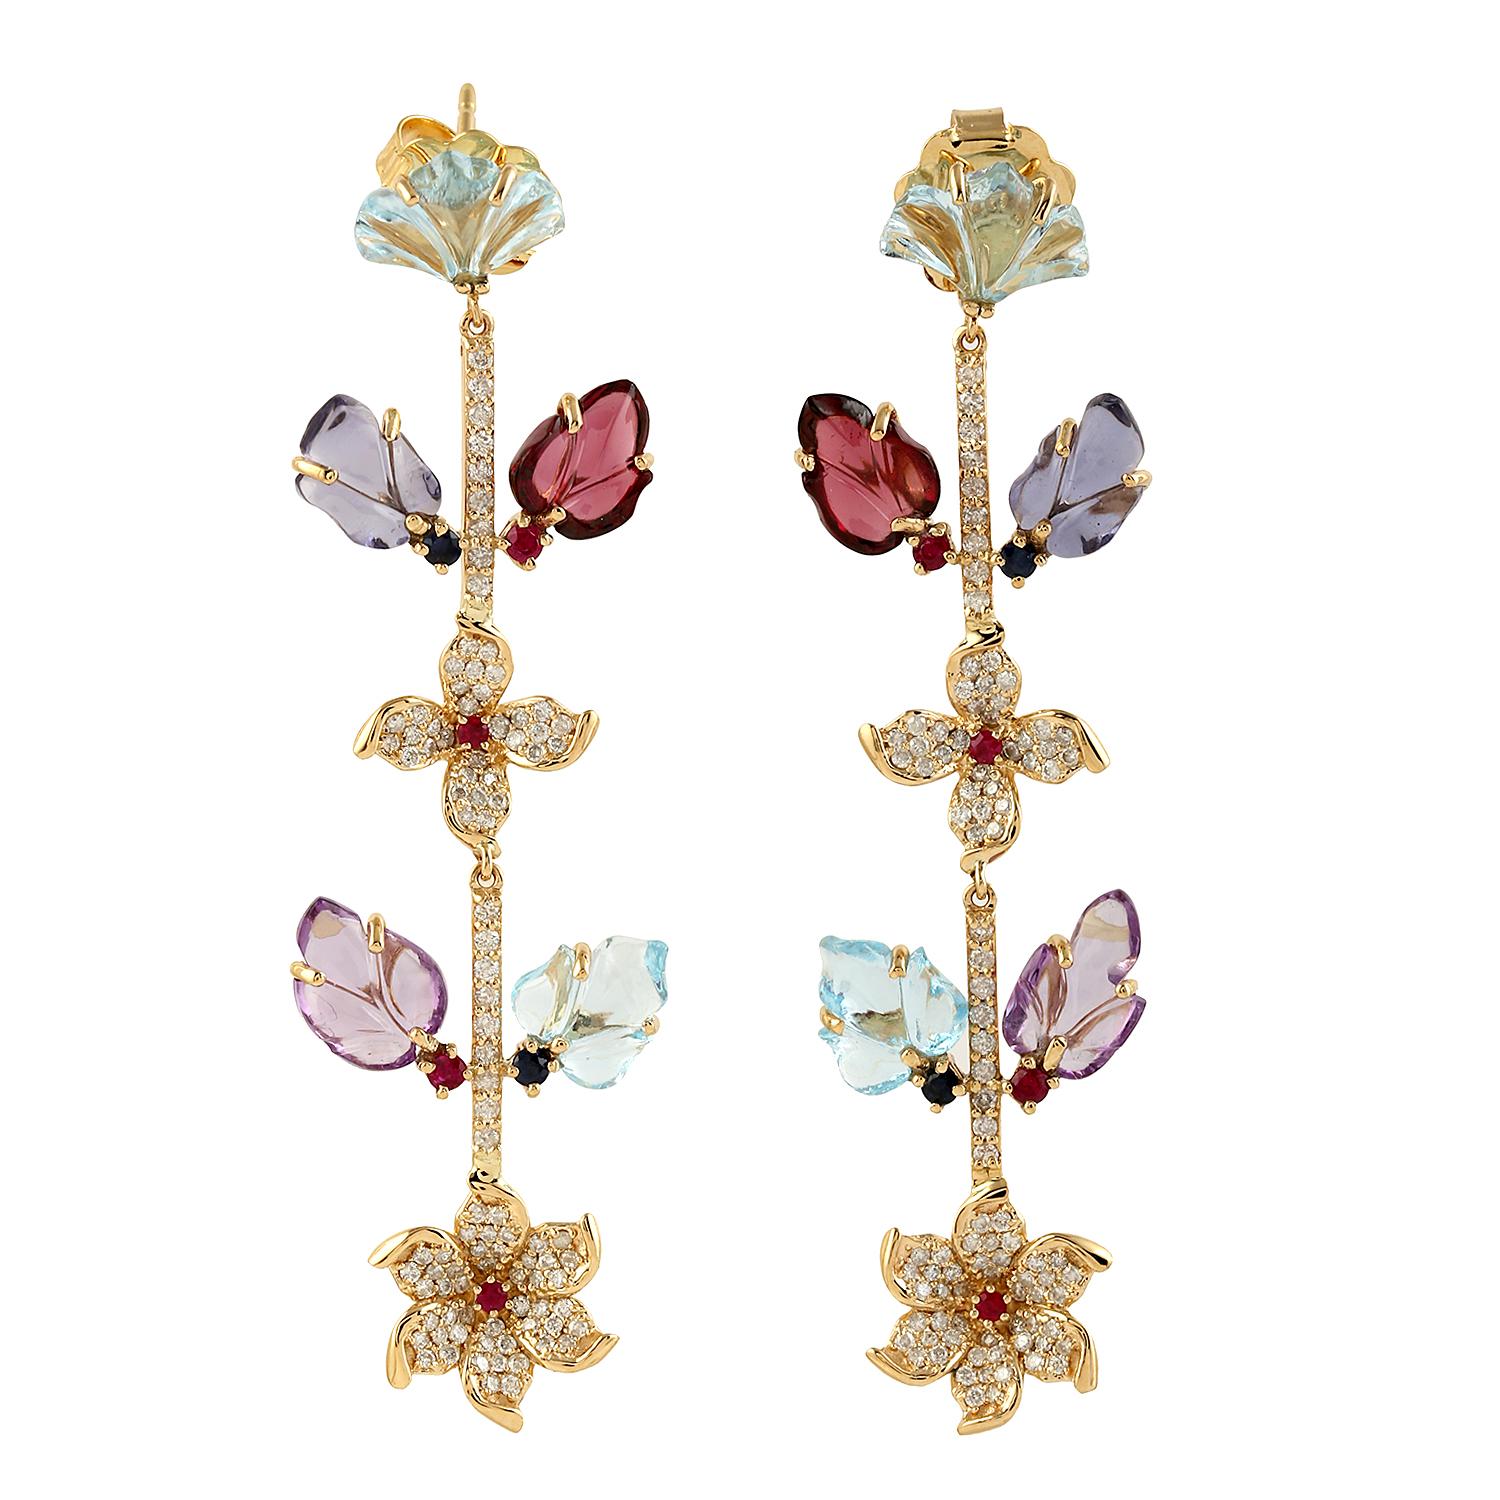 Cast in 18-karat gold. These beautiful earrings are set with 13.25 carats of carved multi gemstone, amethyst,  quartz, topaz, ruby and 1.01 carats of sparkling diamonds.  See other flower collection matching pieces.

FOLLOW  MEGHNA JEWELS storefront